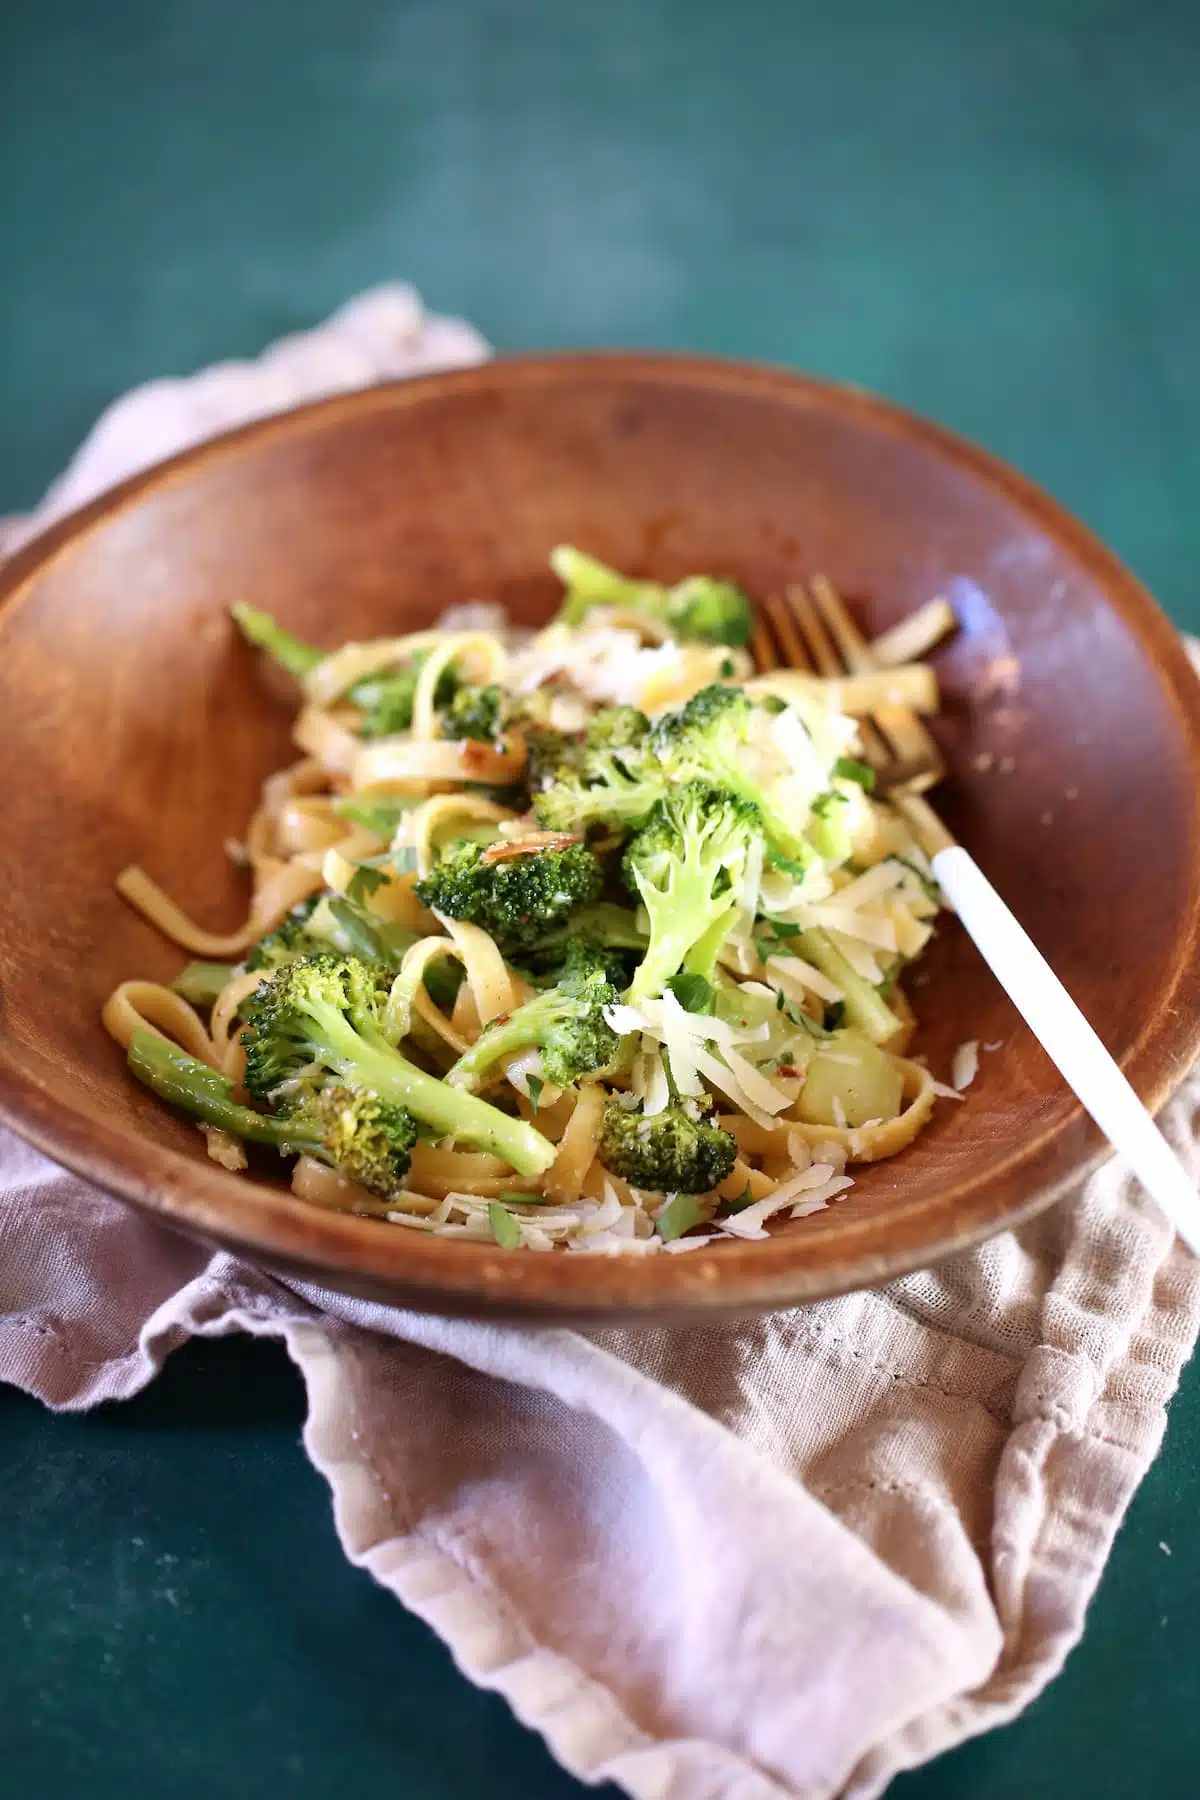 a close up photo of pasta and broccoli in a wooden bowl.